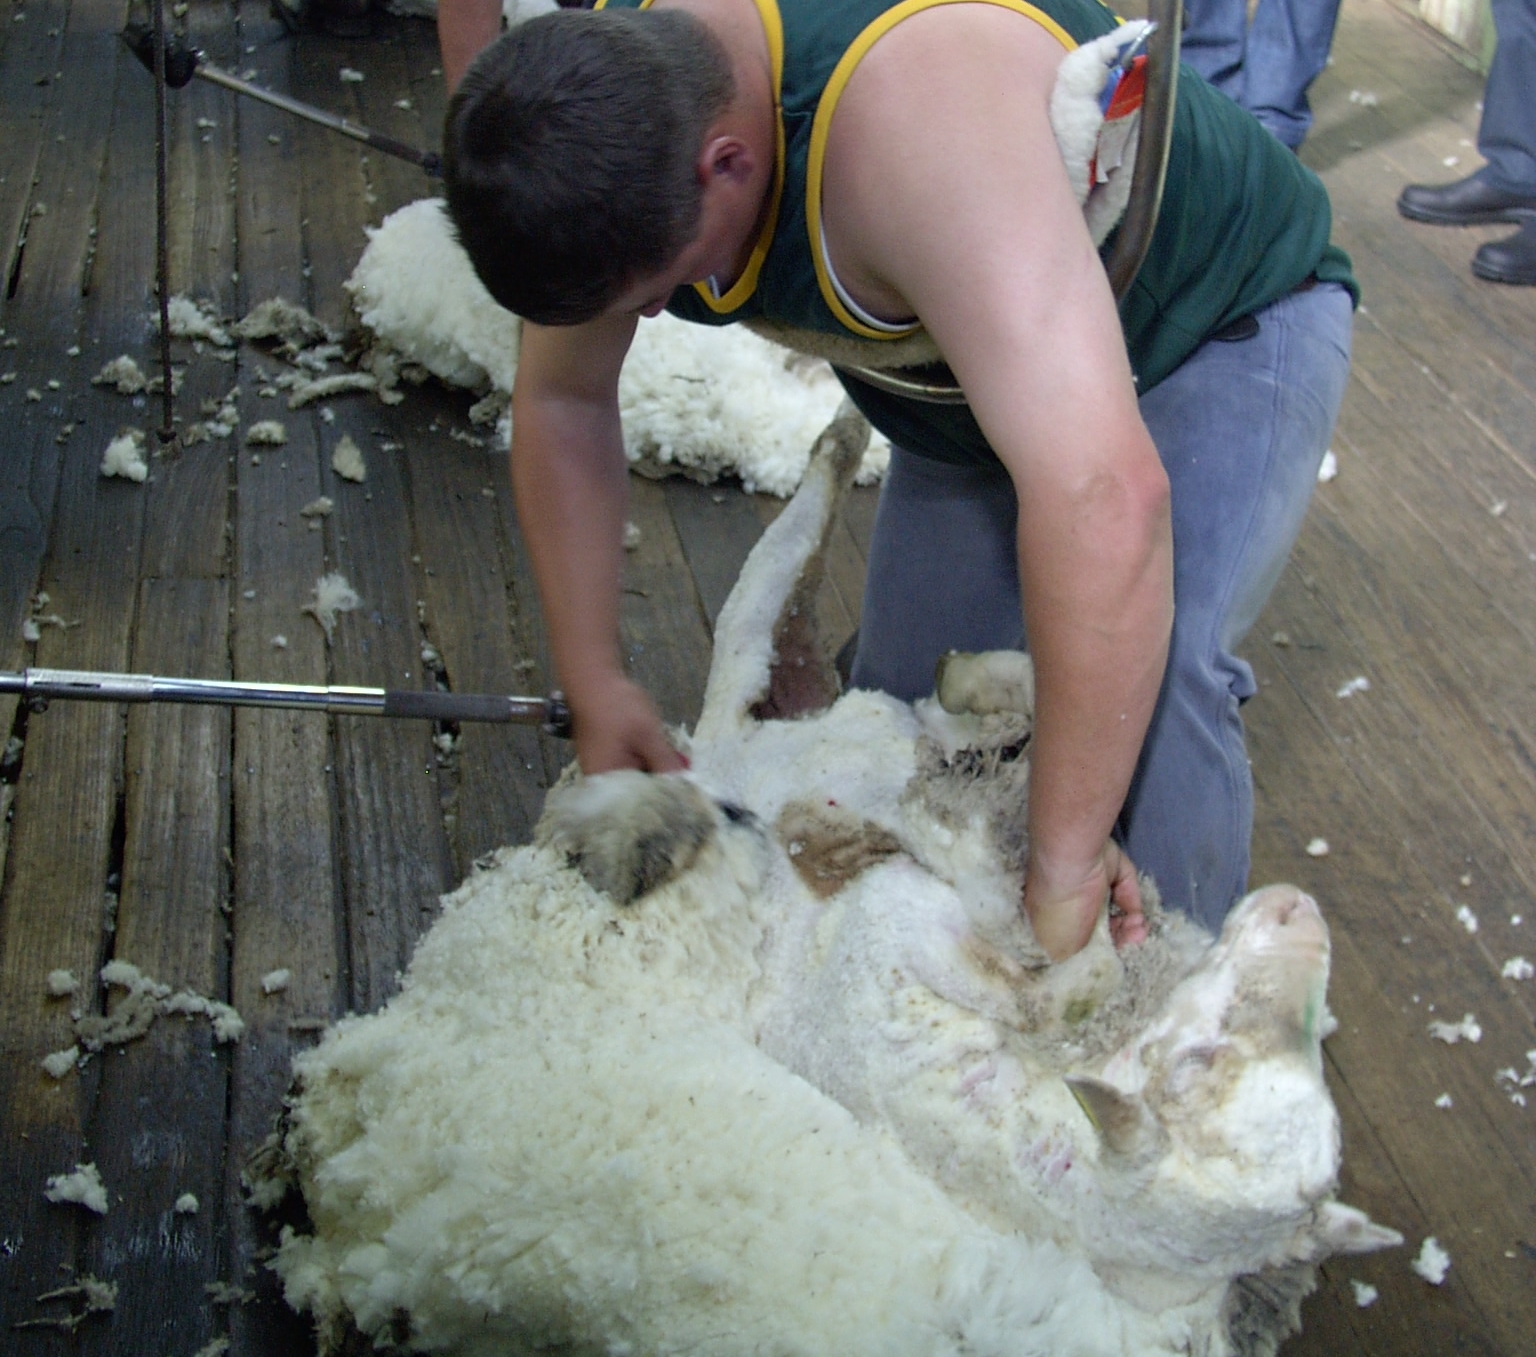 Australian woolgrower levy remains at 1.5%